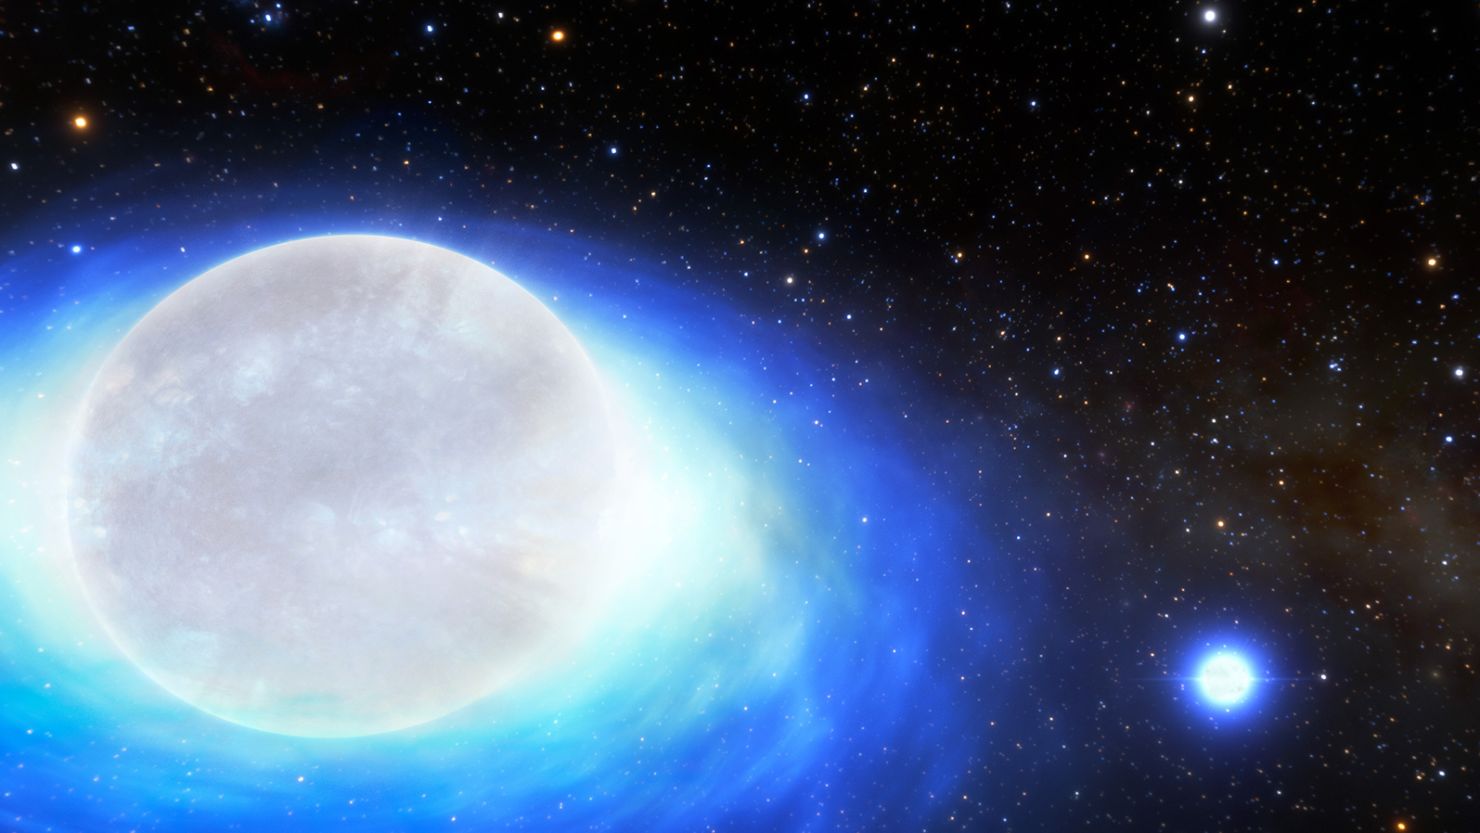 Why Is This Weird, Metallic Star Hurtling Out of the Milky Way